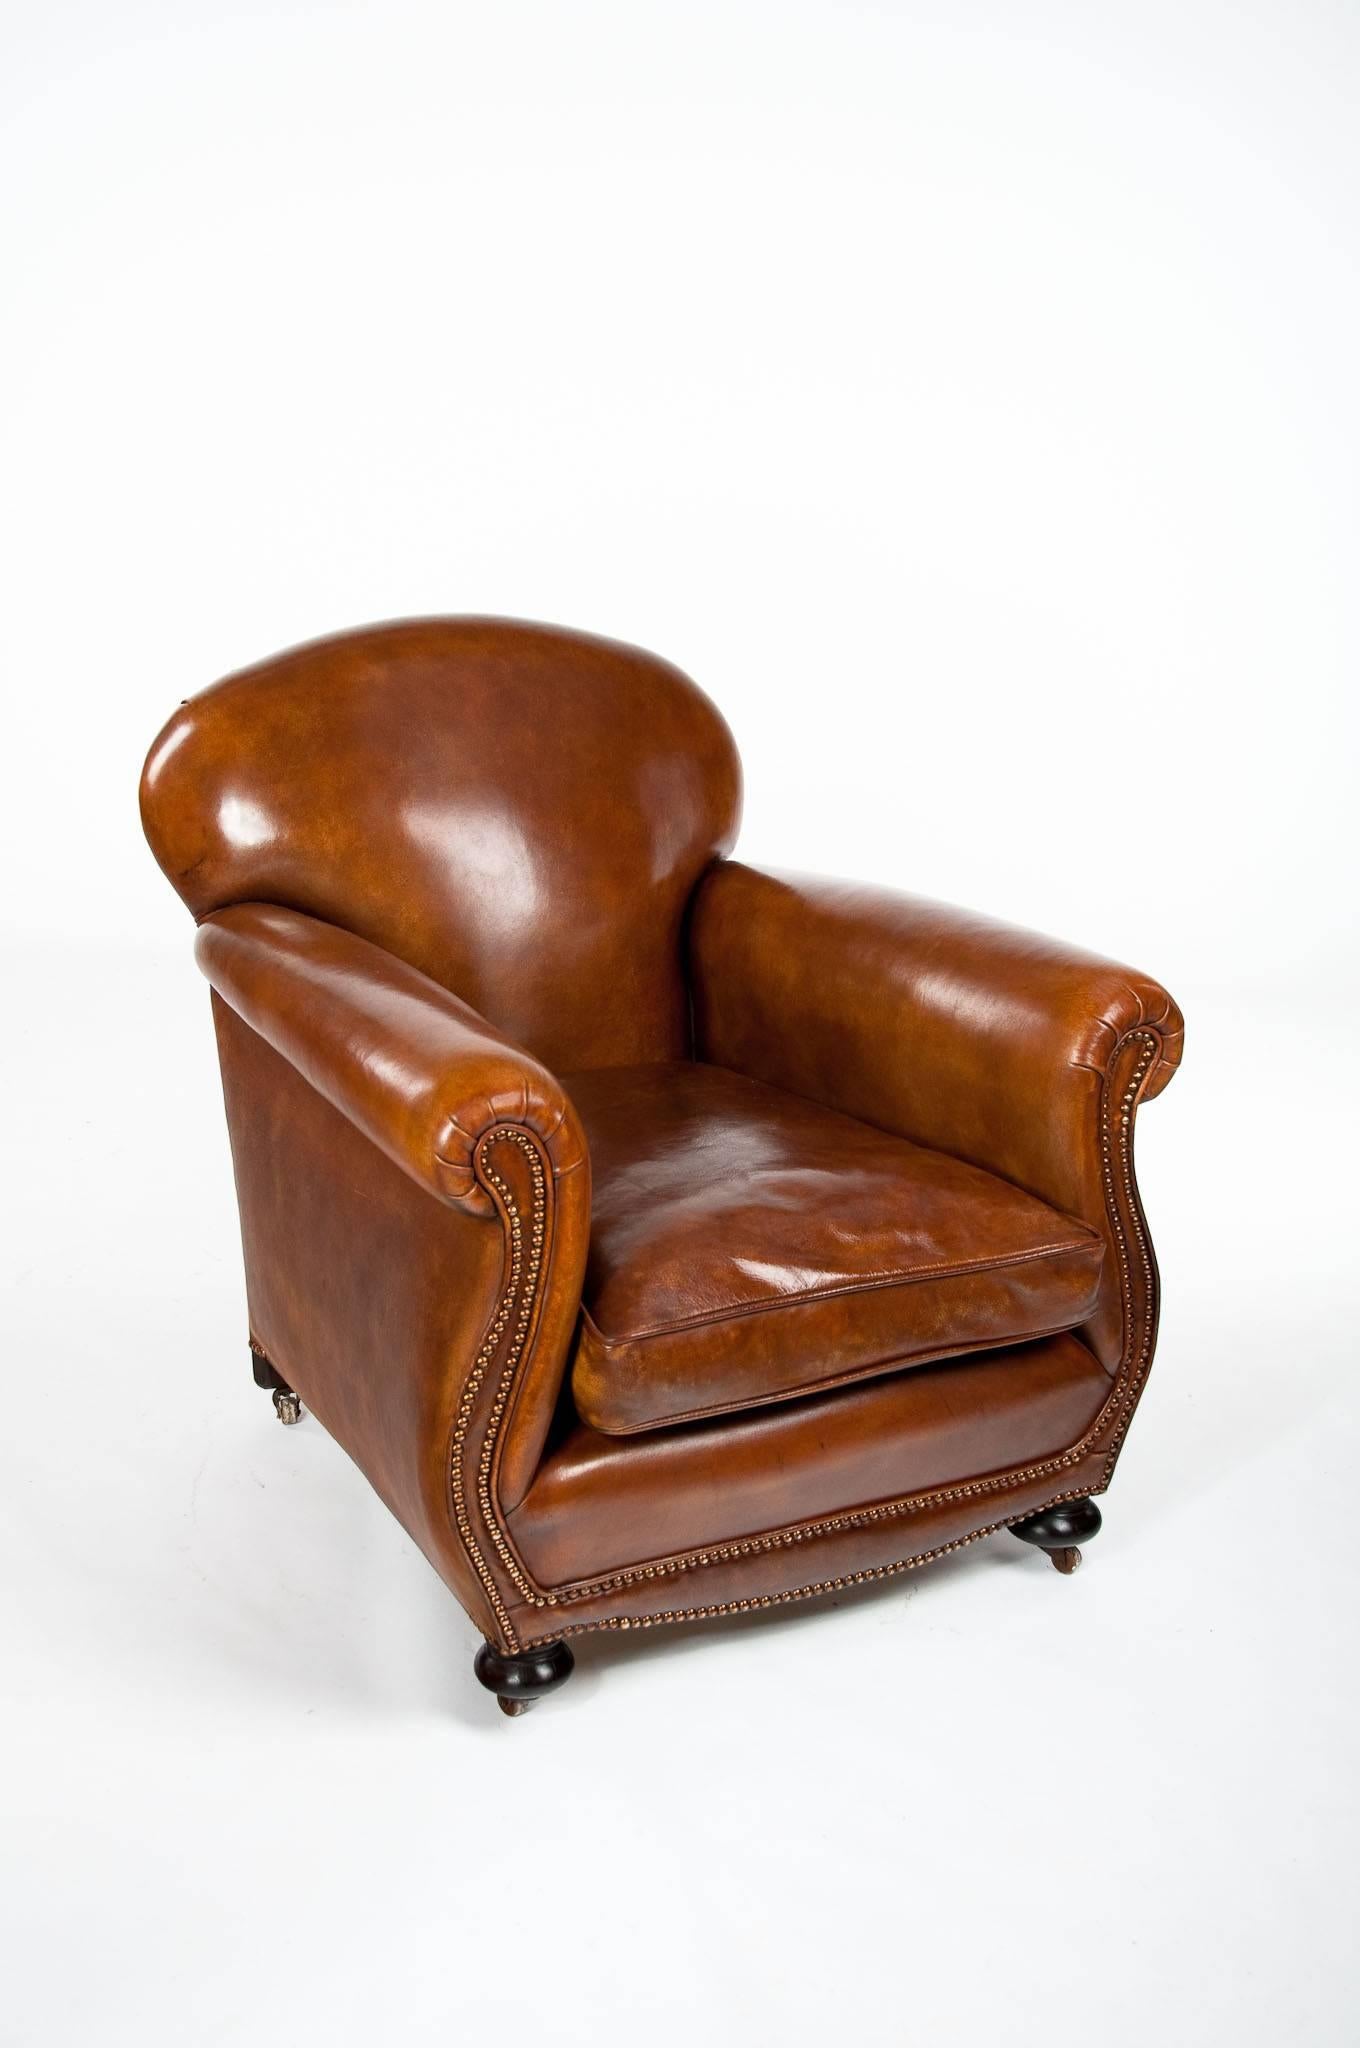 A Quality antique leather upholstered club armchair.

 This Victorian leather upholstered club armchair has a rounded back with beautifully serpentine shaped arms and brass nailed studding. The leather chair has a generous feather cushioned squab